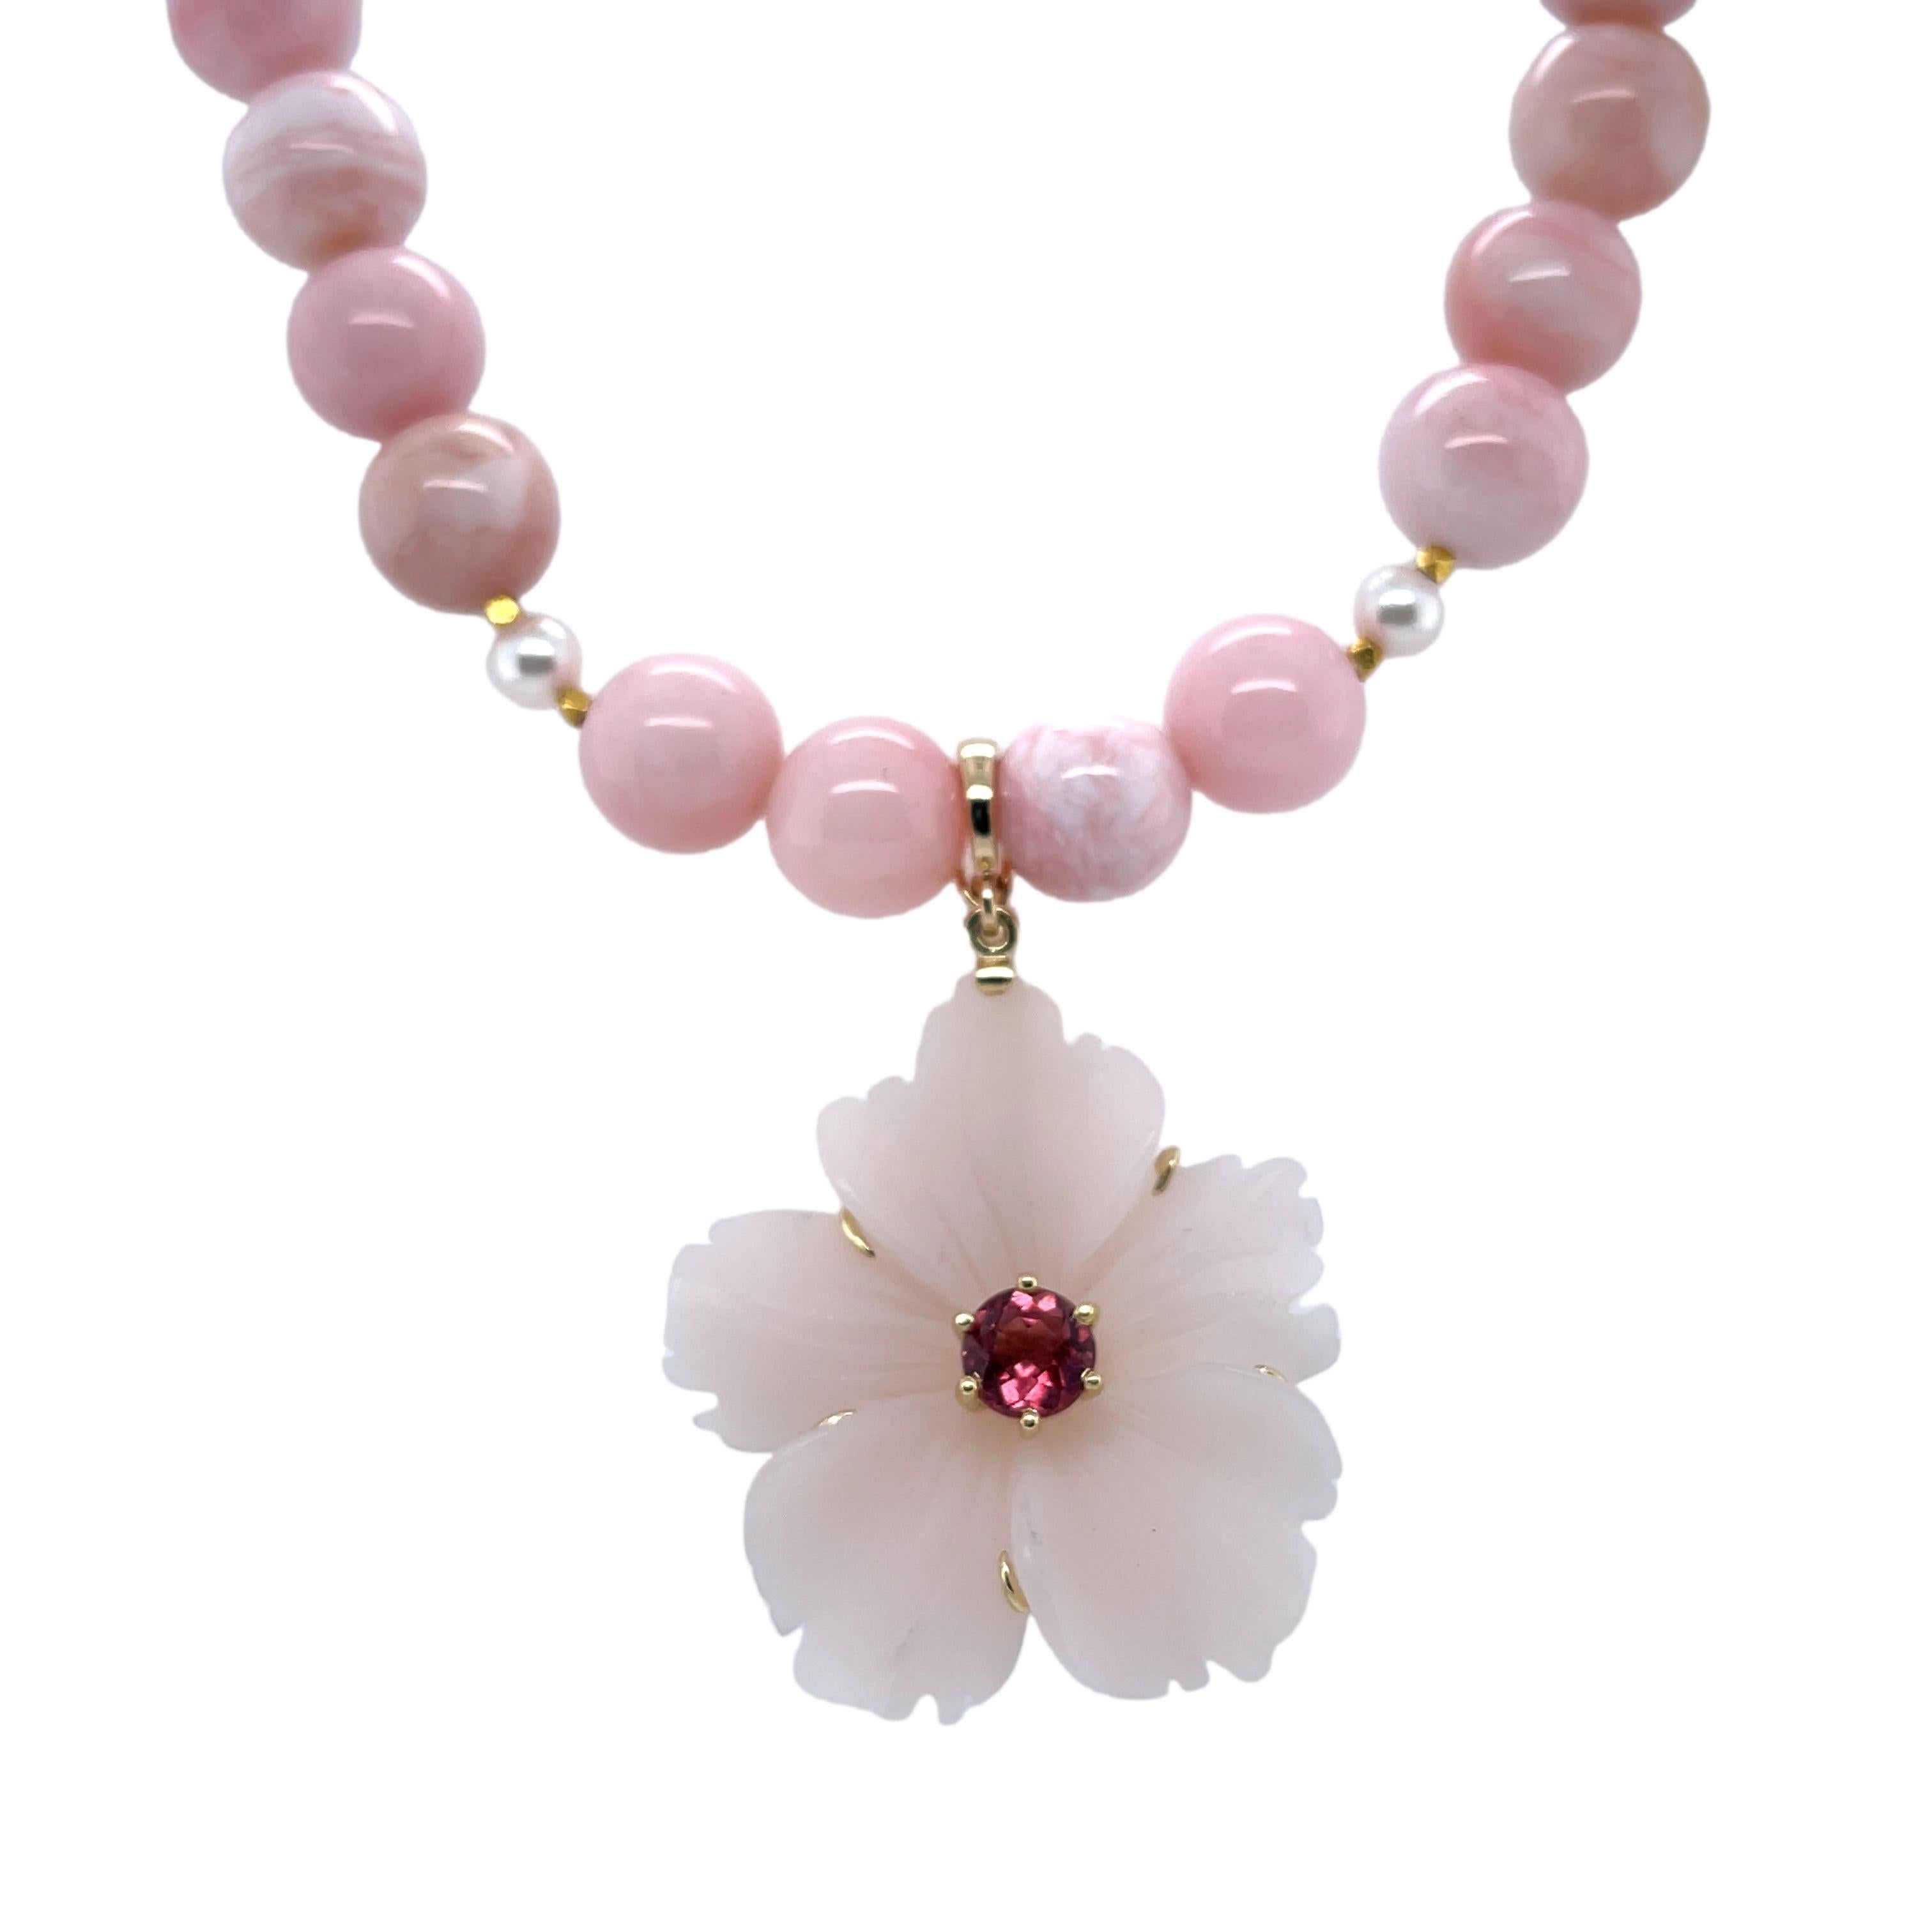 This beautiful pink gemstone necklace pairs a lovely flower pendant carved from a single piece of  